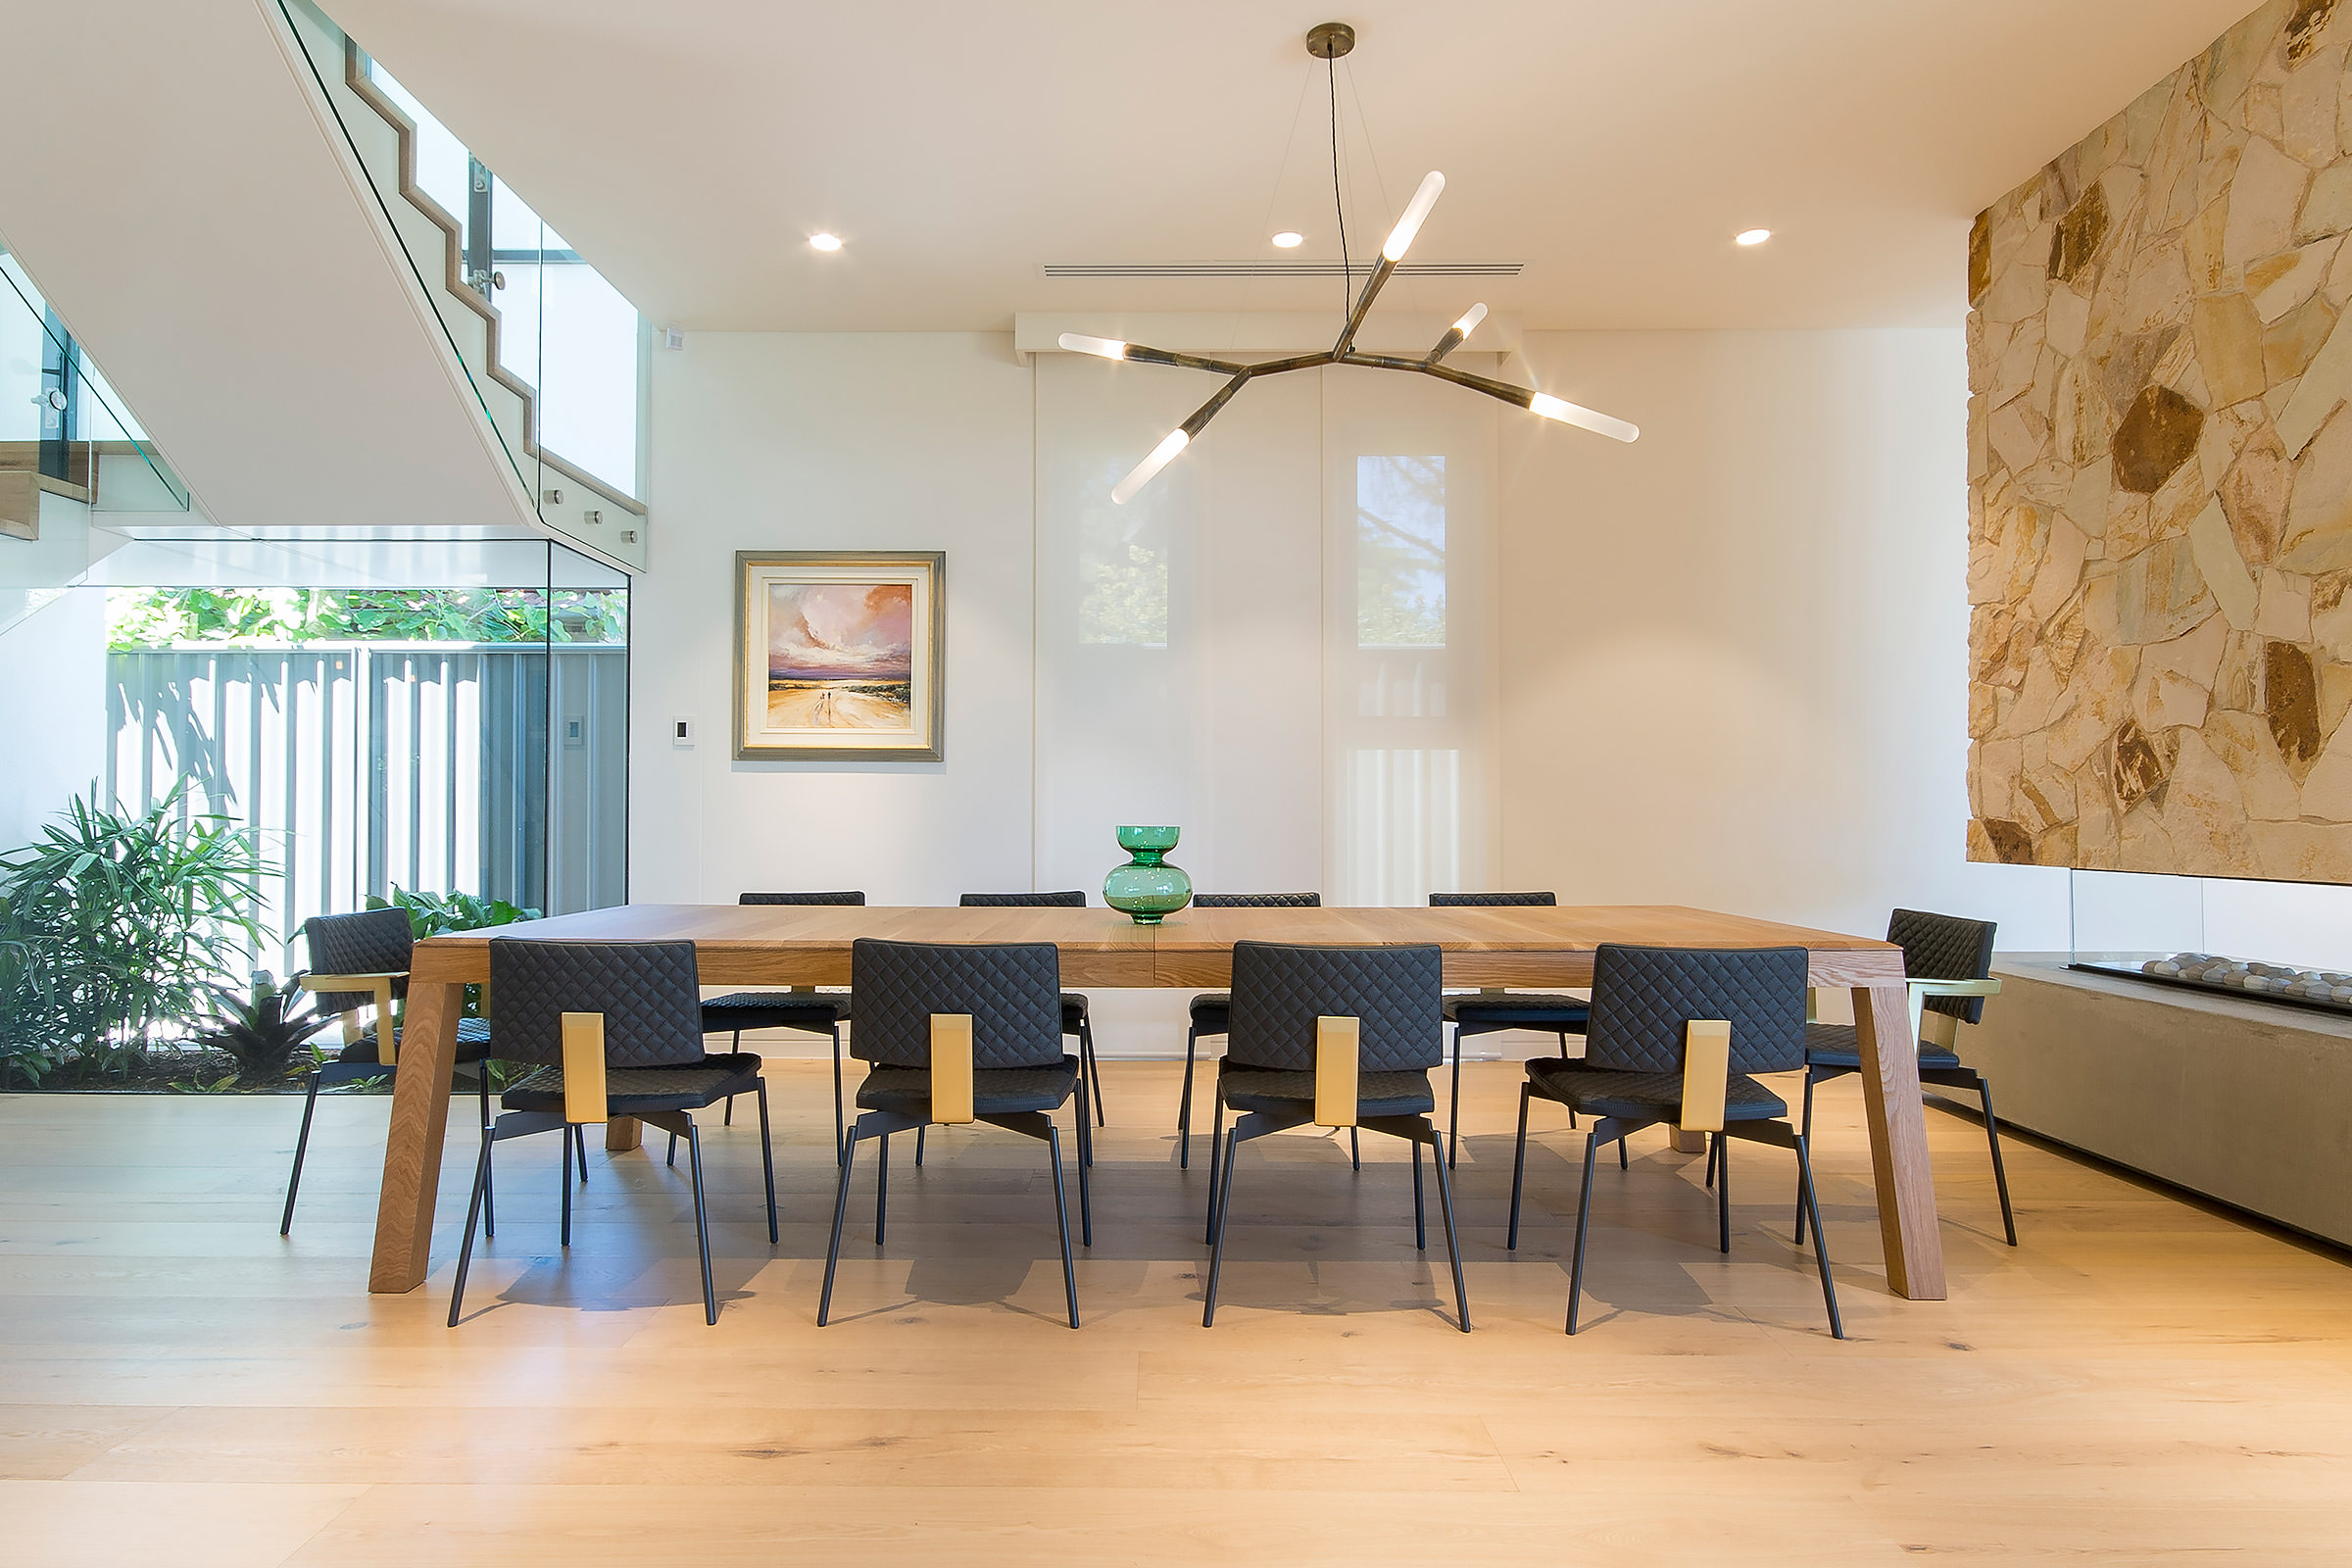 soft natural light filters down over the designer dining table and chairs created by Australian designer FrancoCrea in this inviting dining room